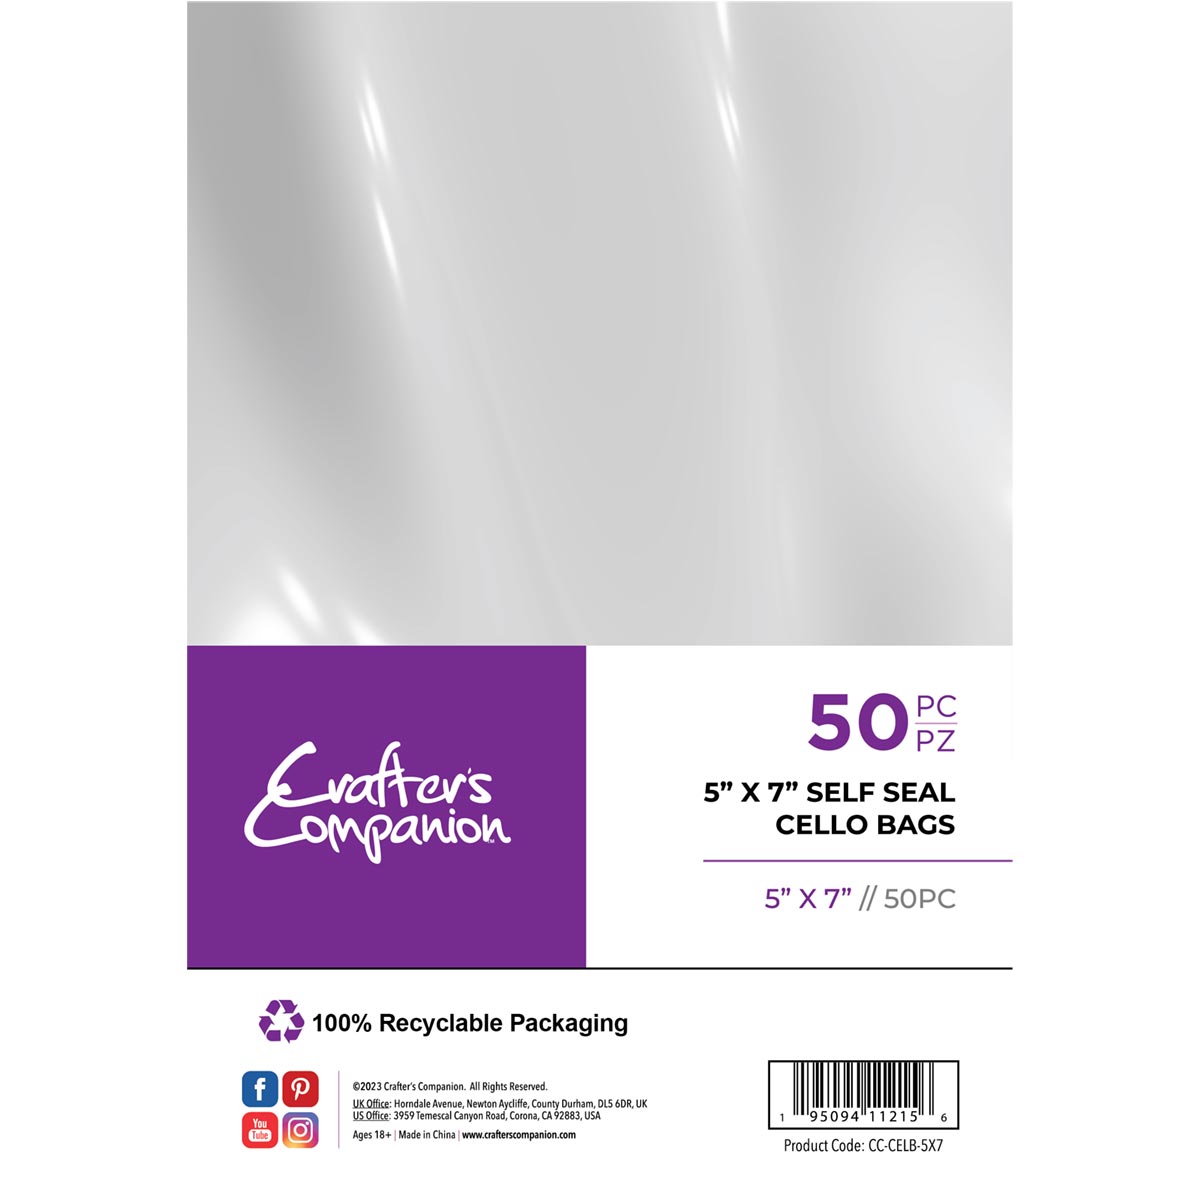 Crafter's Companion - Self Seal Cellophane Card Bags - 5 "x 7" 50 pack